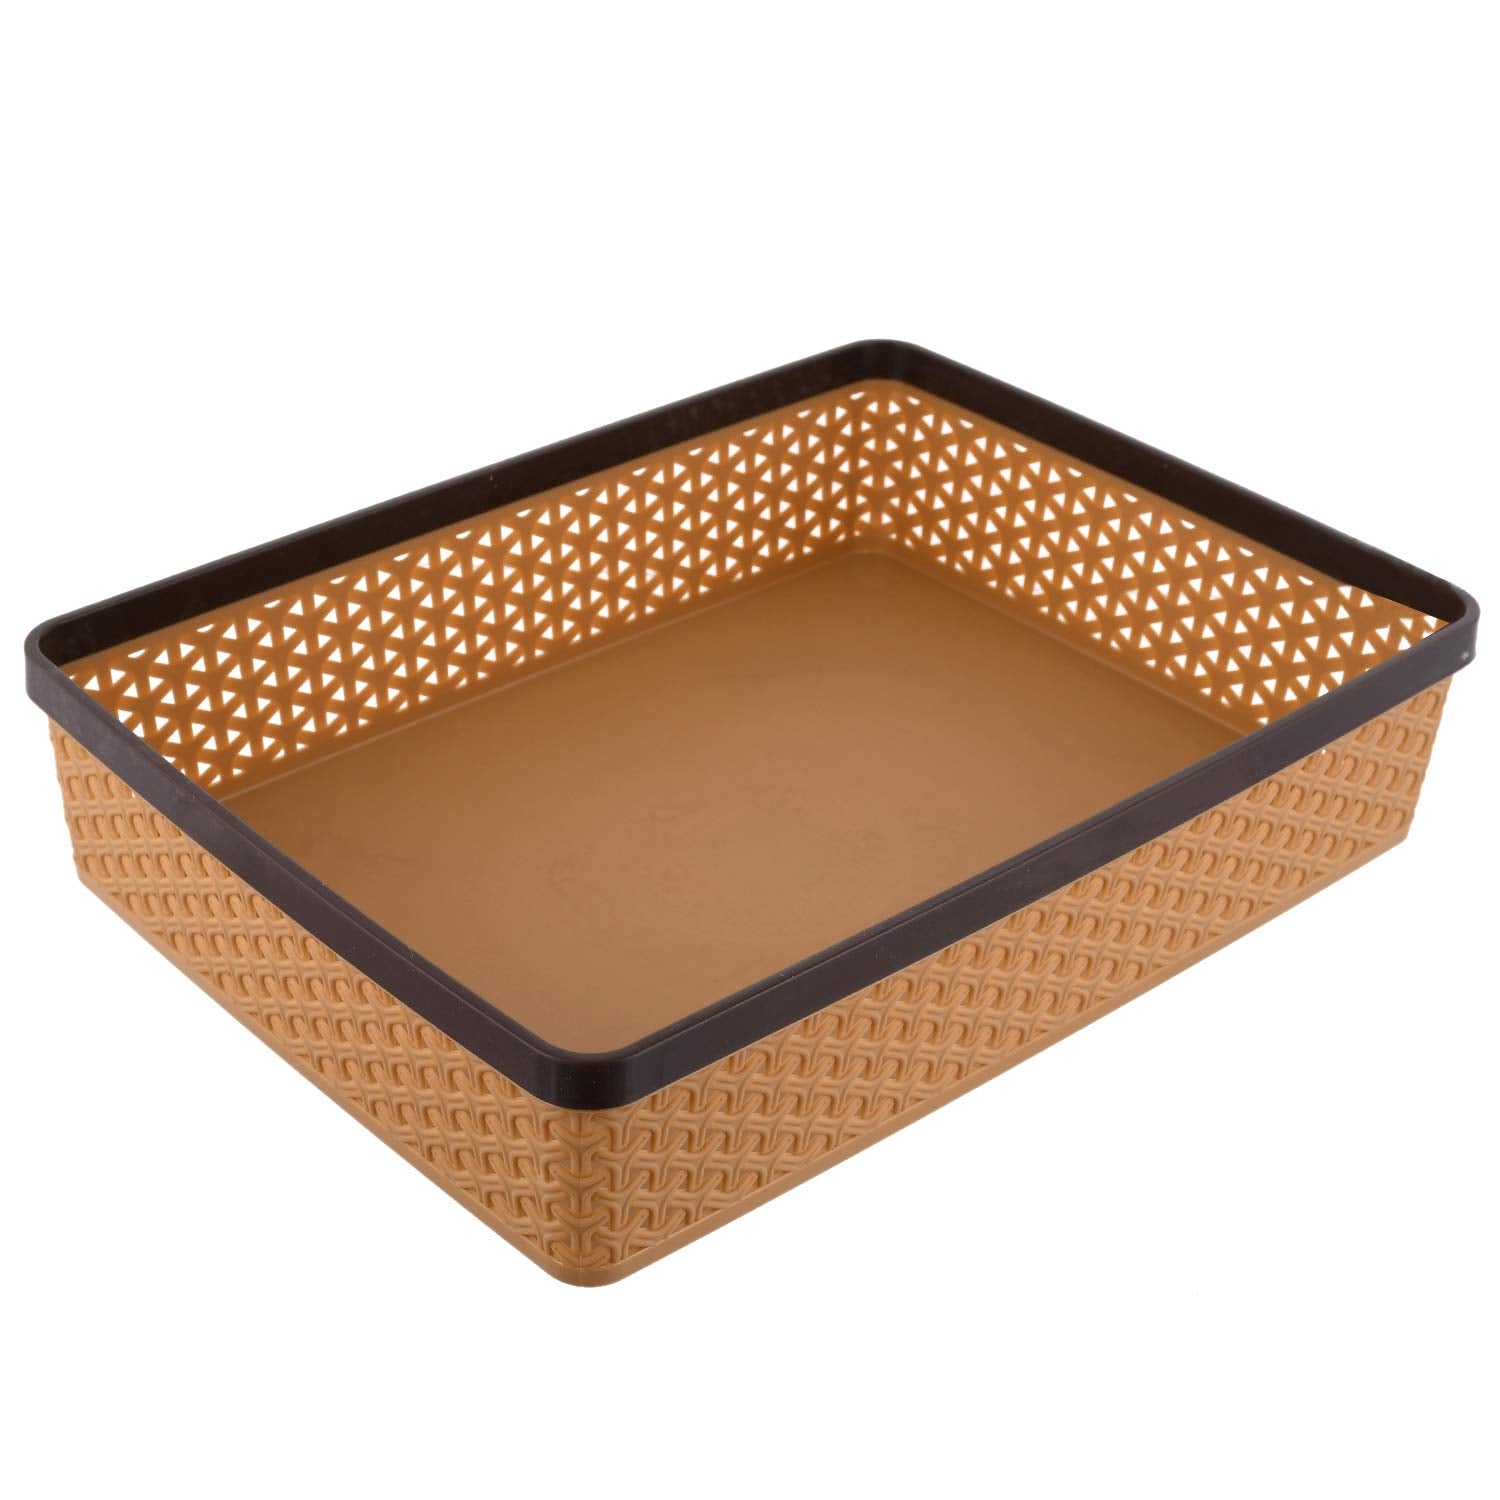 Kuber Industries Plastic 4 Pieces Solitaire Stationary Office Tray, File Tray, Document Tray, Paper Tray A4 Documents/Papers/Letters/folders Holder Desk Organizer (Brown & Coffee)